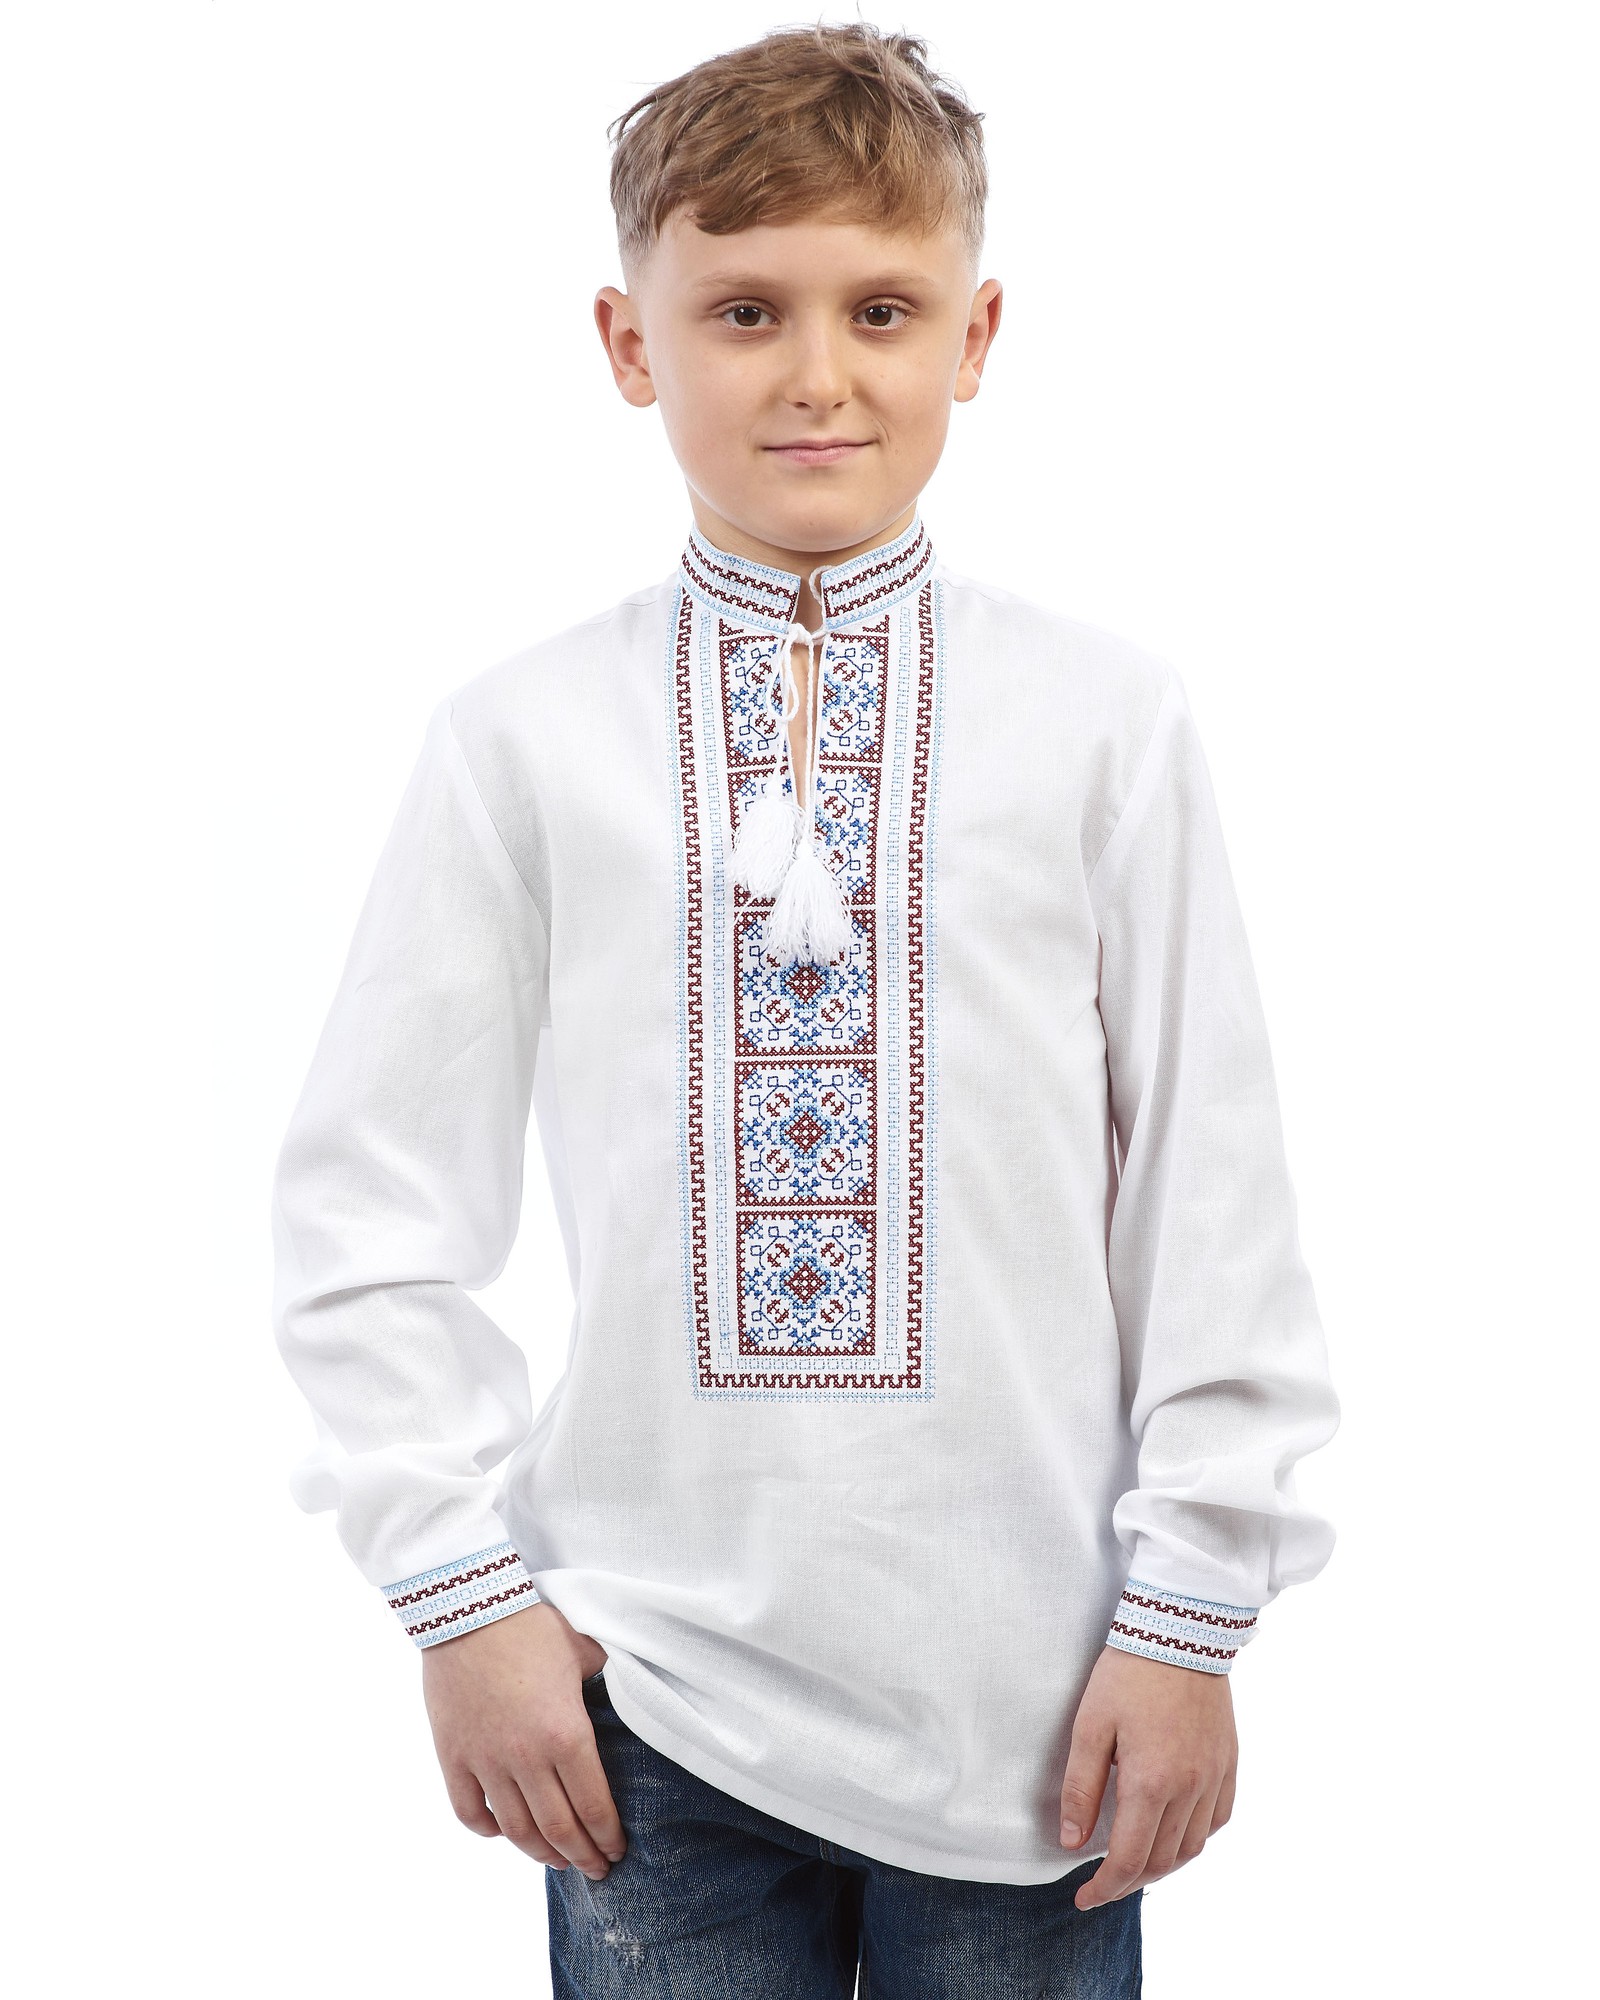 Embroidered shirt for boys 911-18/09